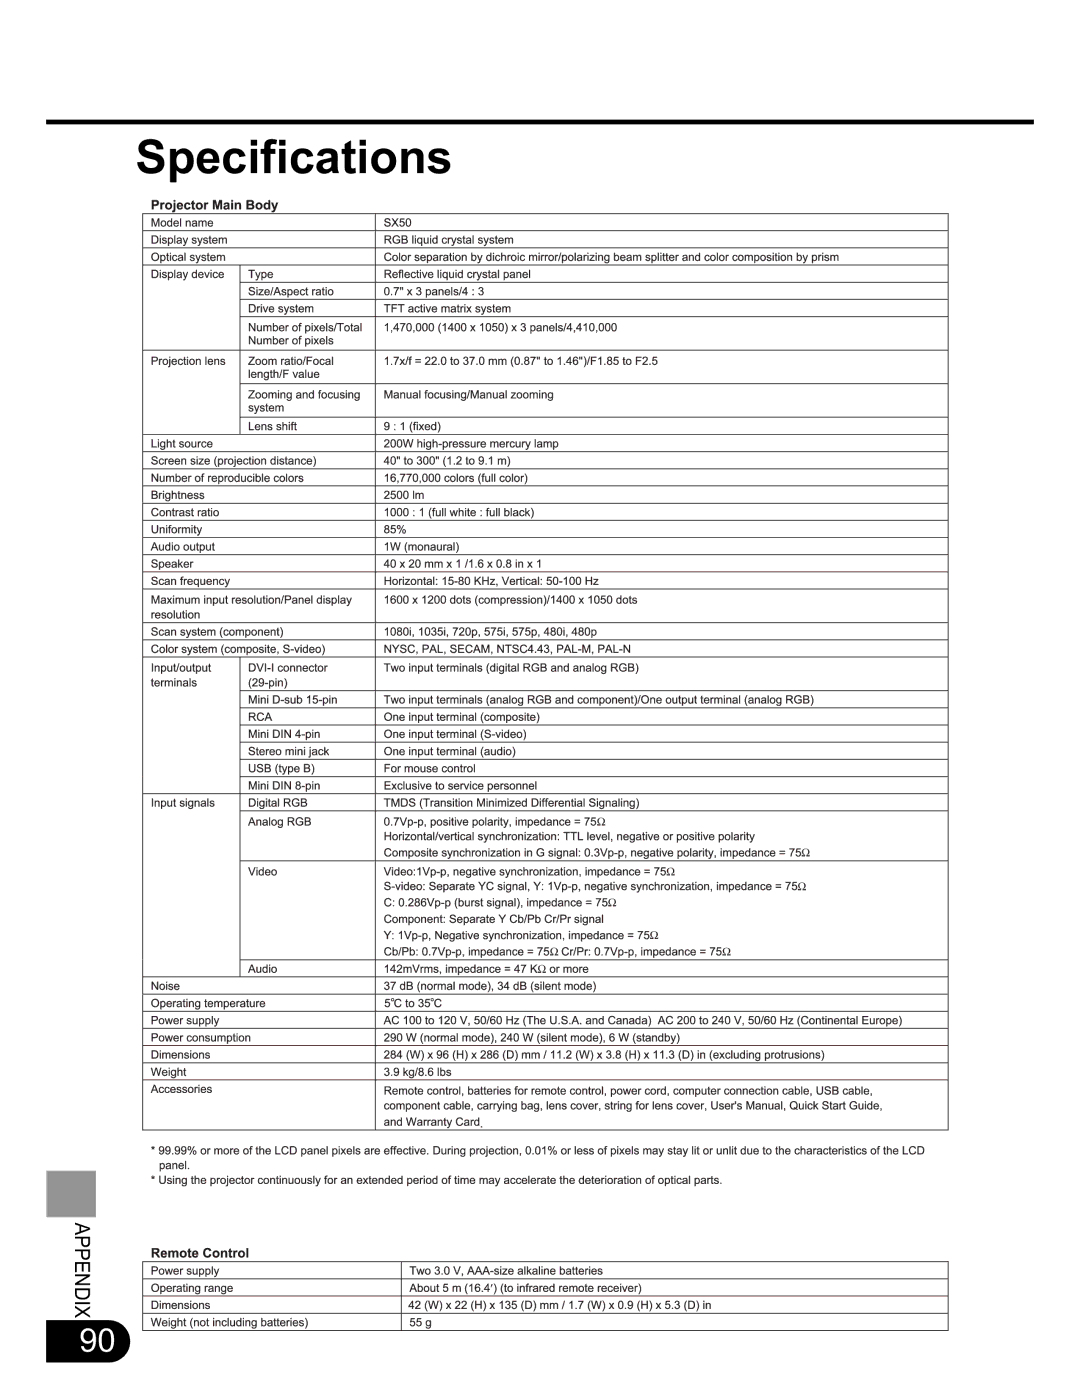 Canon SX20 manual Specifications 